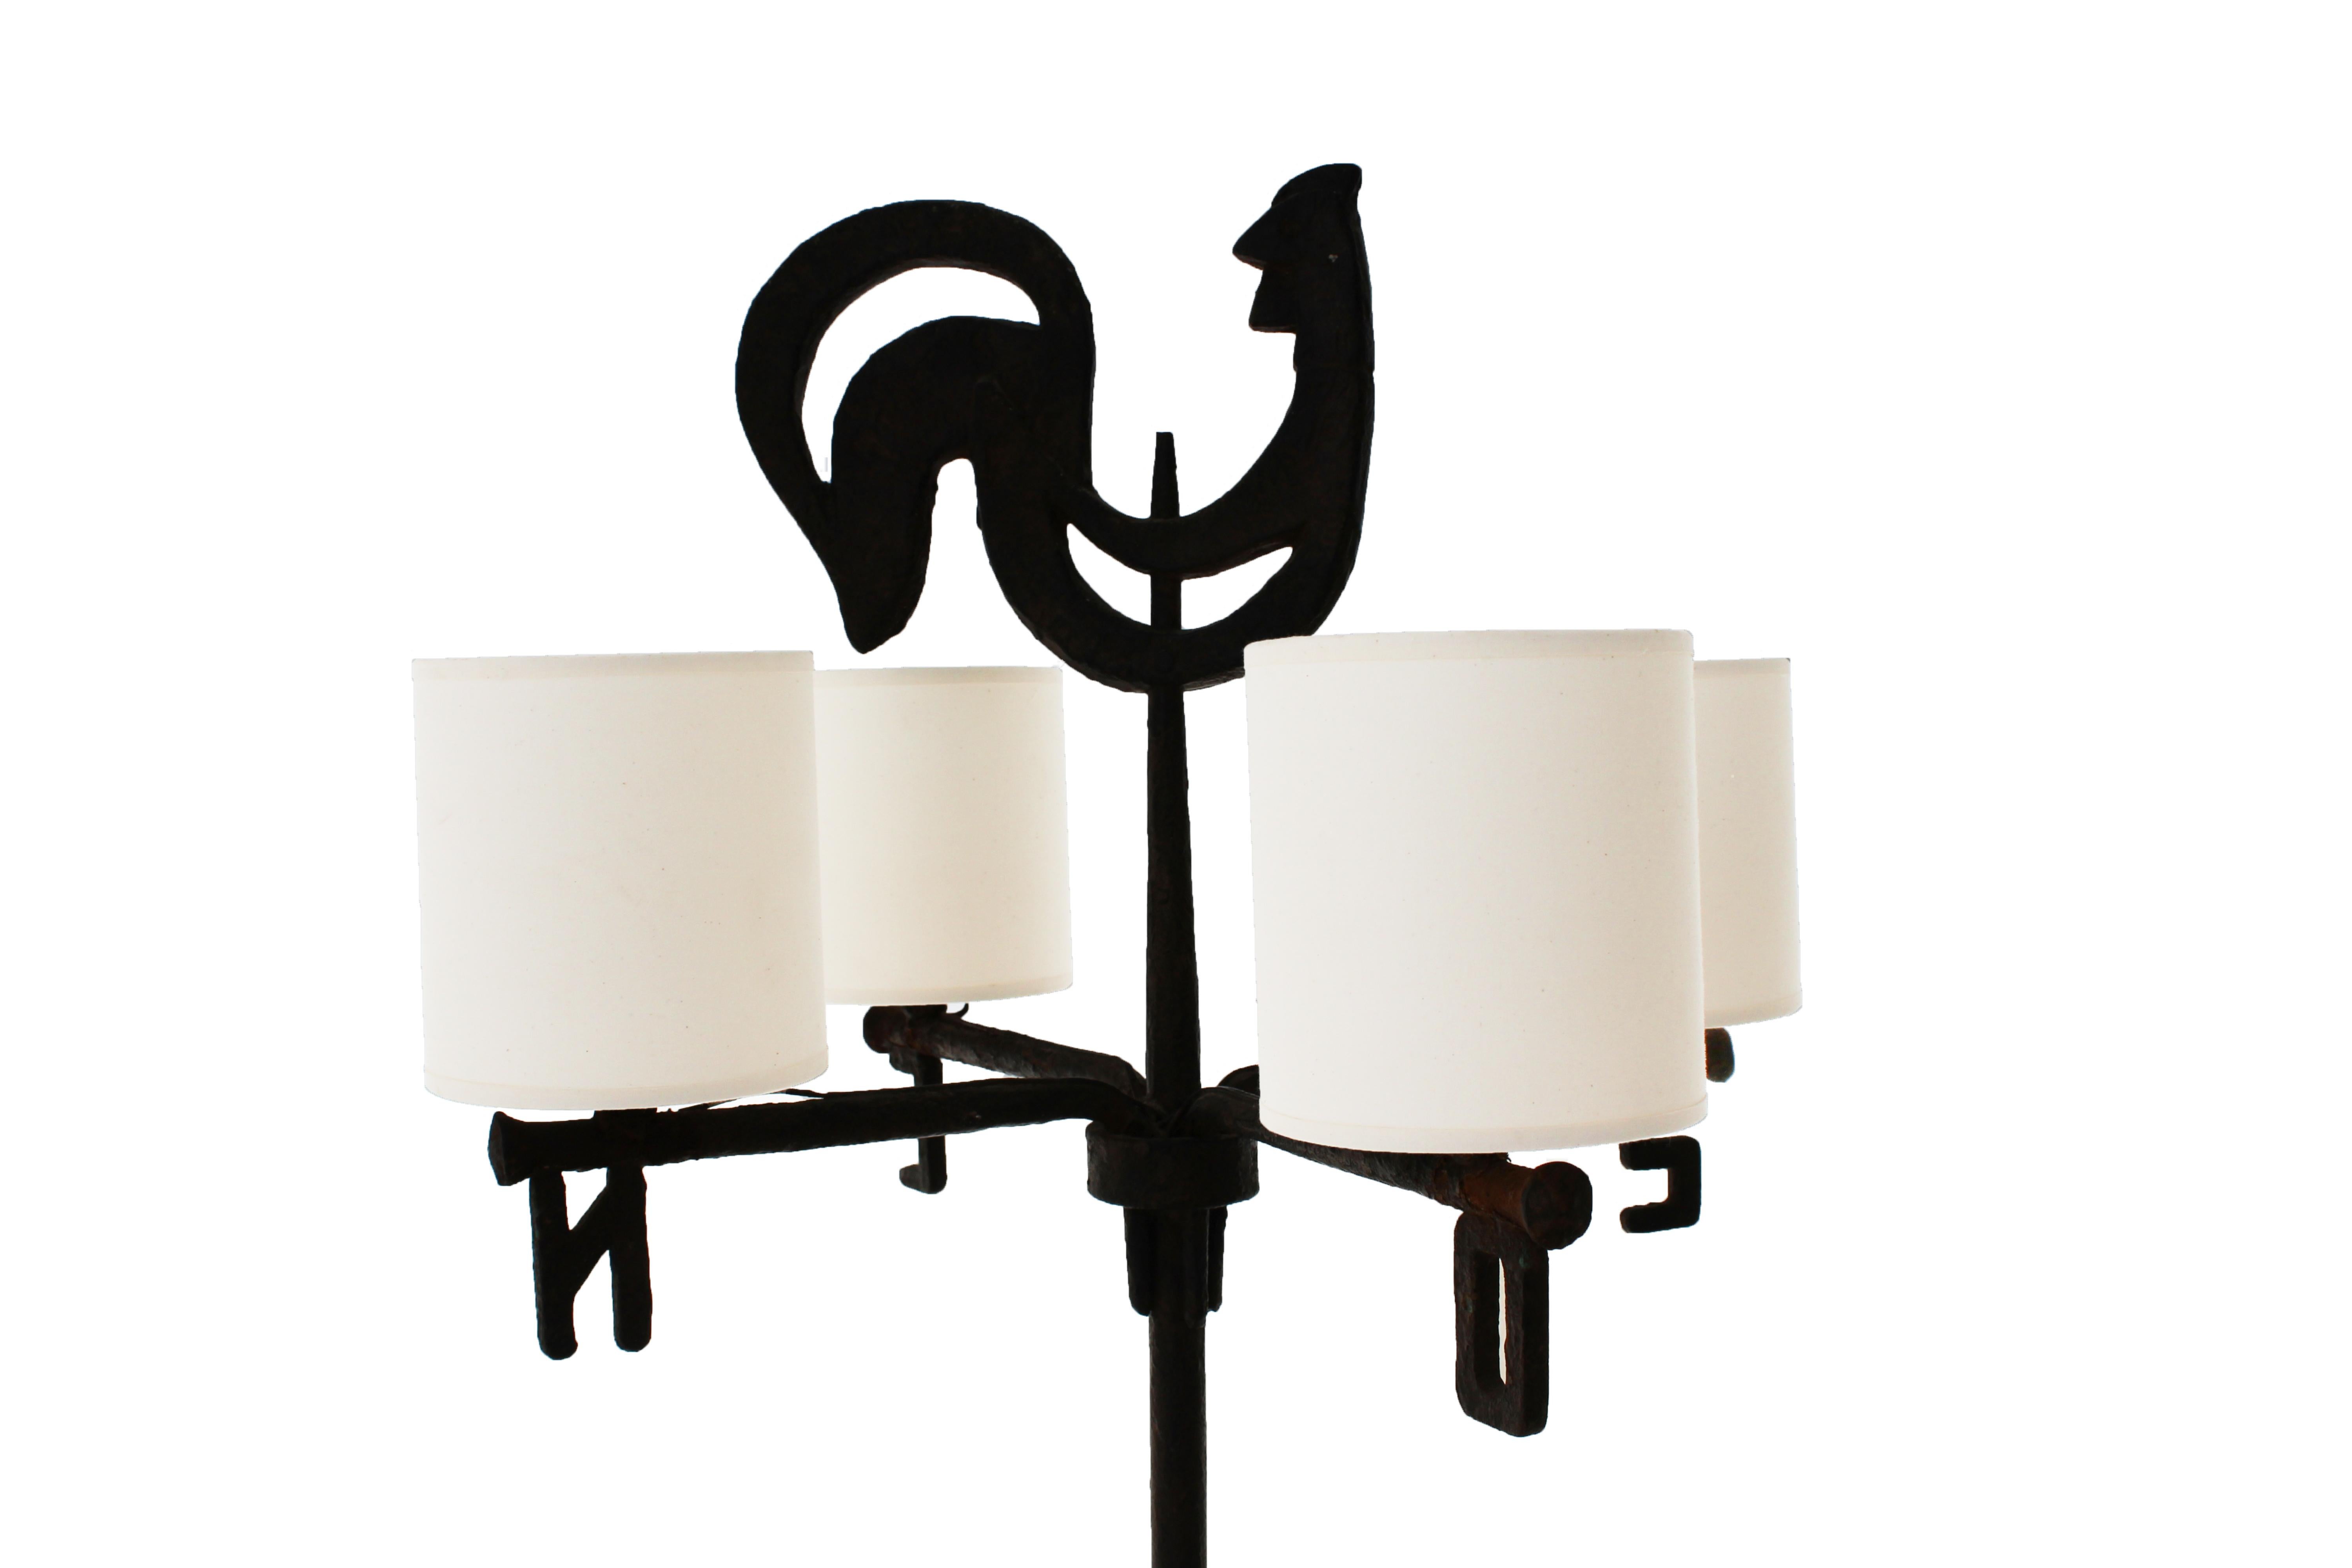 Jean Touret (1916-2004) for the Marolles workshop,
Four-light floor lamp model « Girouette »,
Wrought iron beaten with rooster decoration and under each light the initial of the four cardinal points,
Tripod base,
With four lampshades, 
Circa